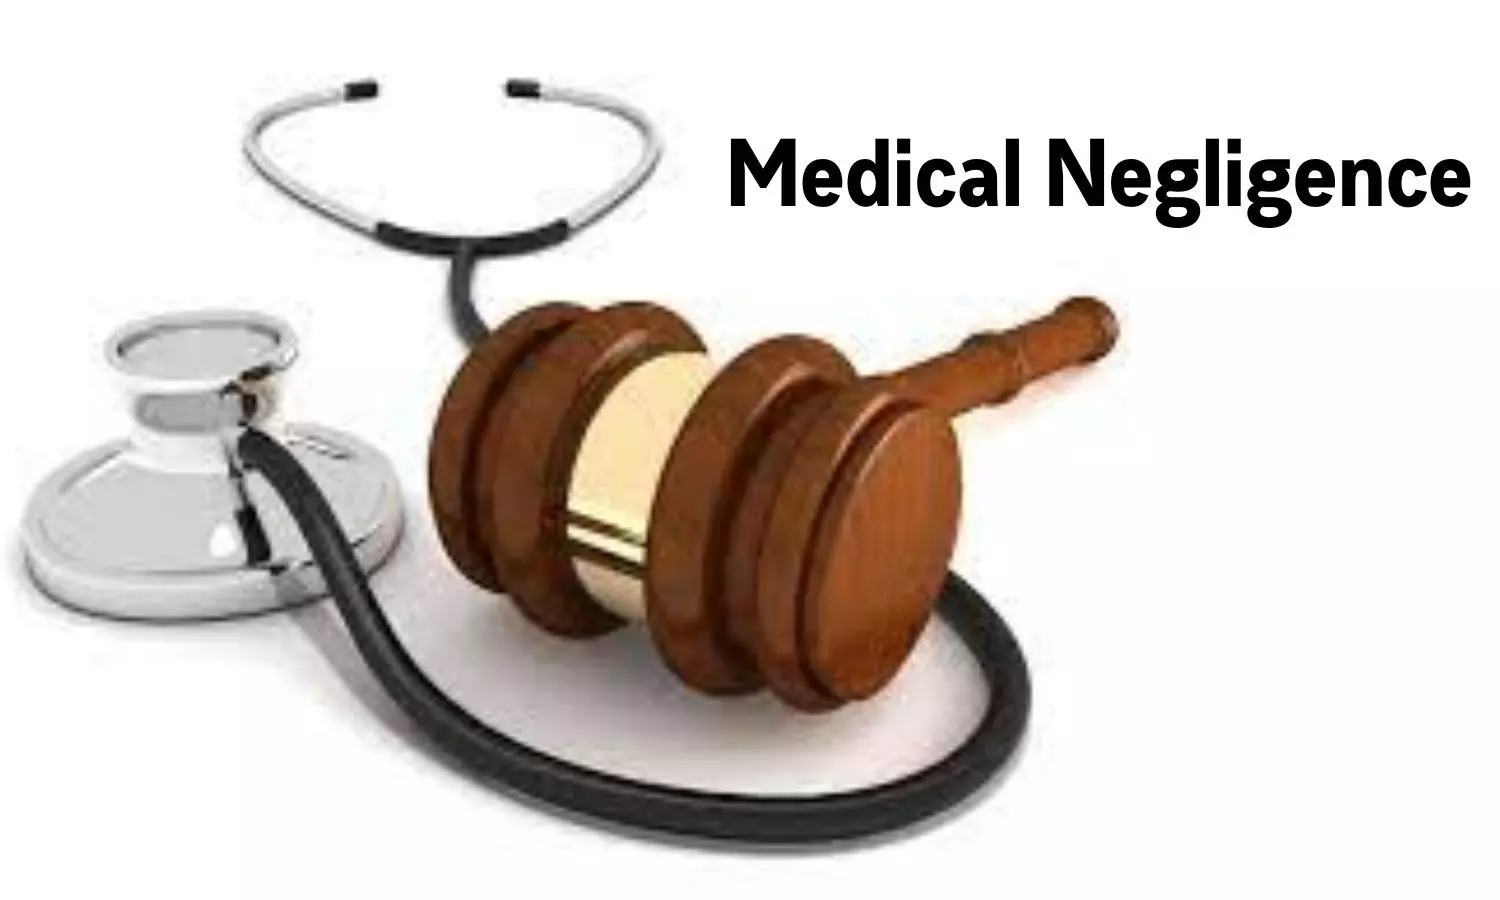 Formulate stringent guidelines to regulate Antenatal USG protocols: NCDRC directs NMC upholding Medical Negligence of doctor